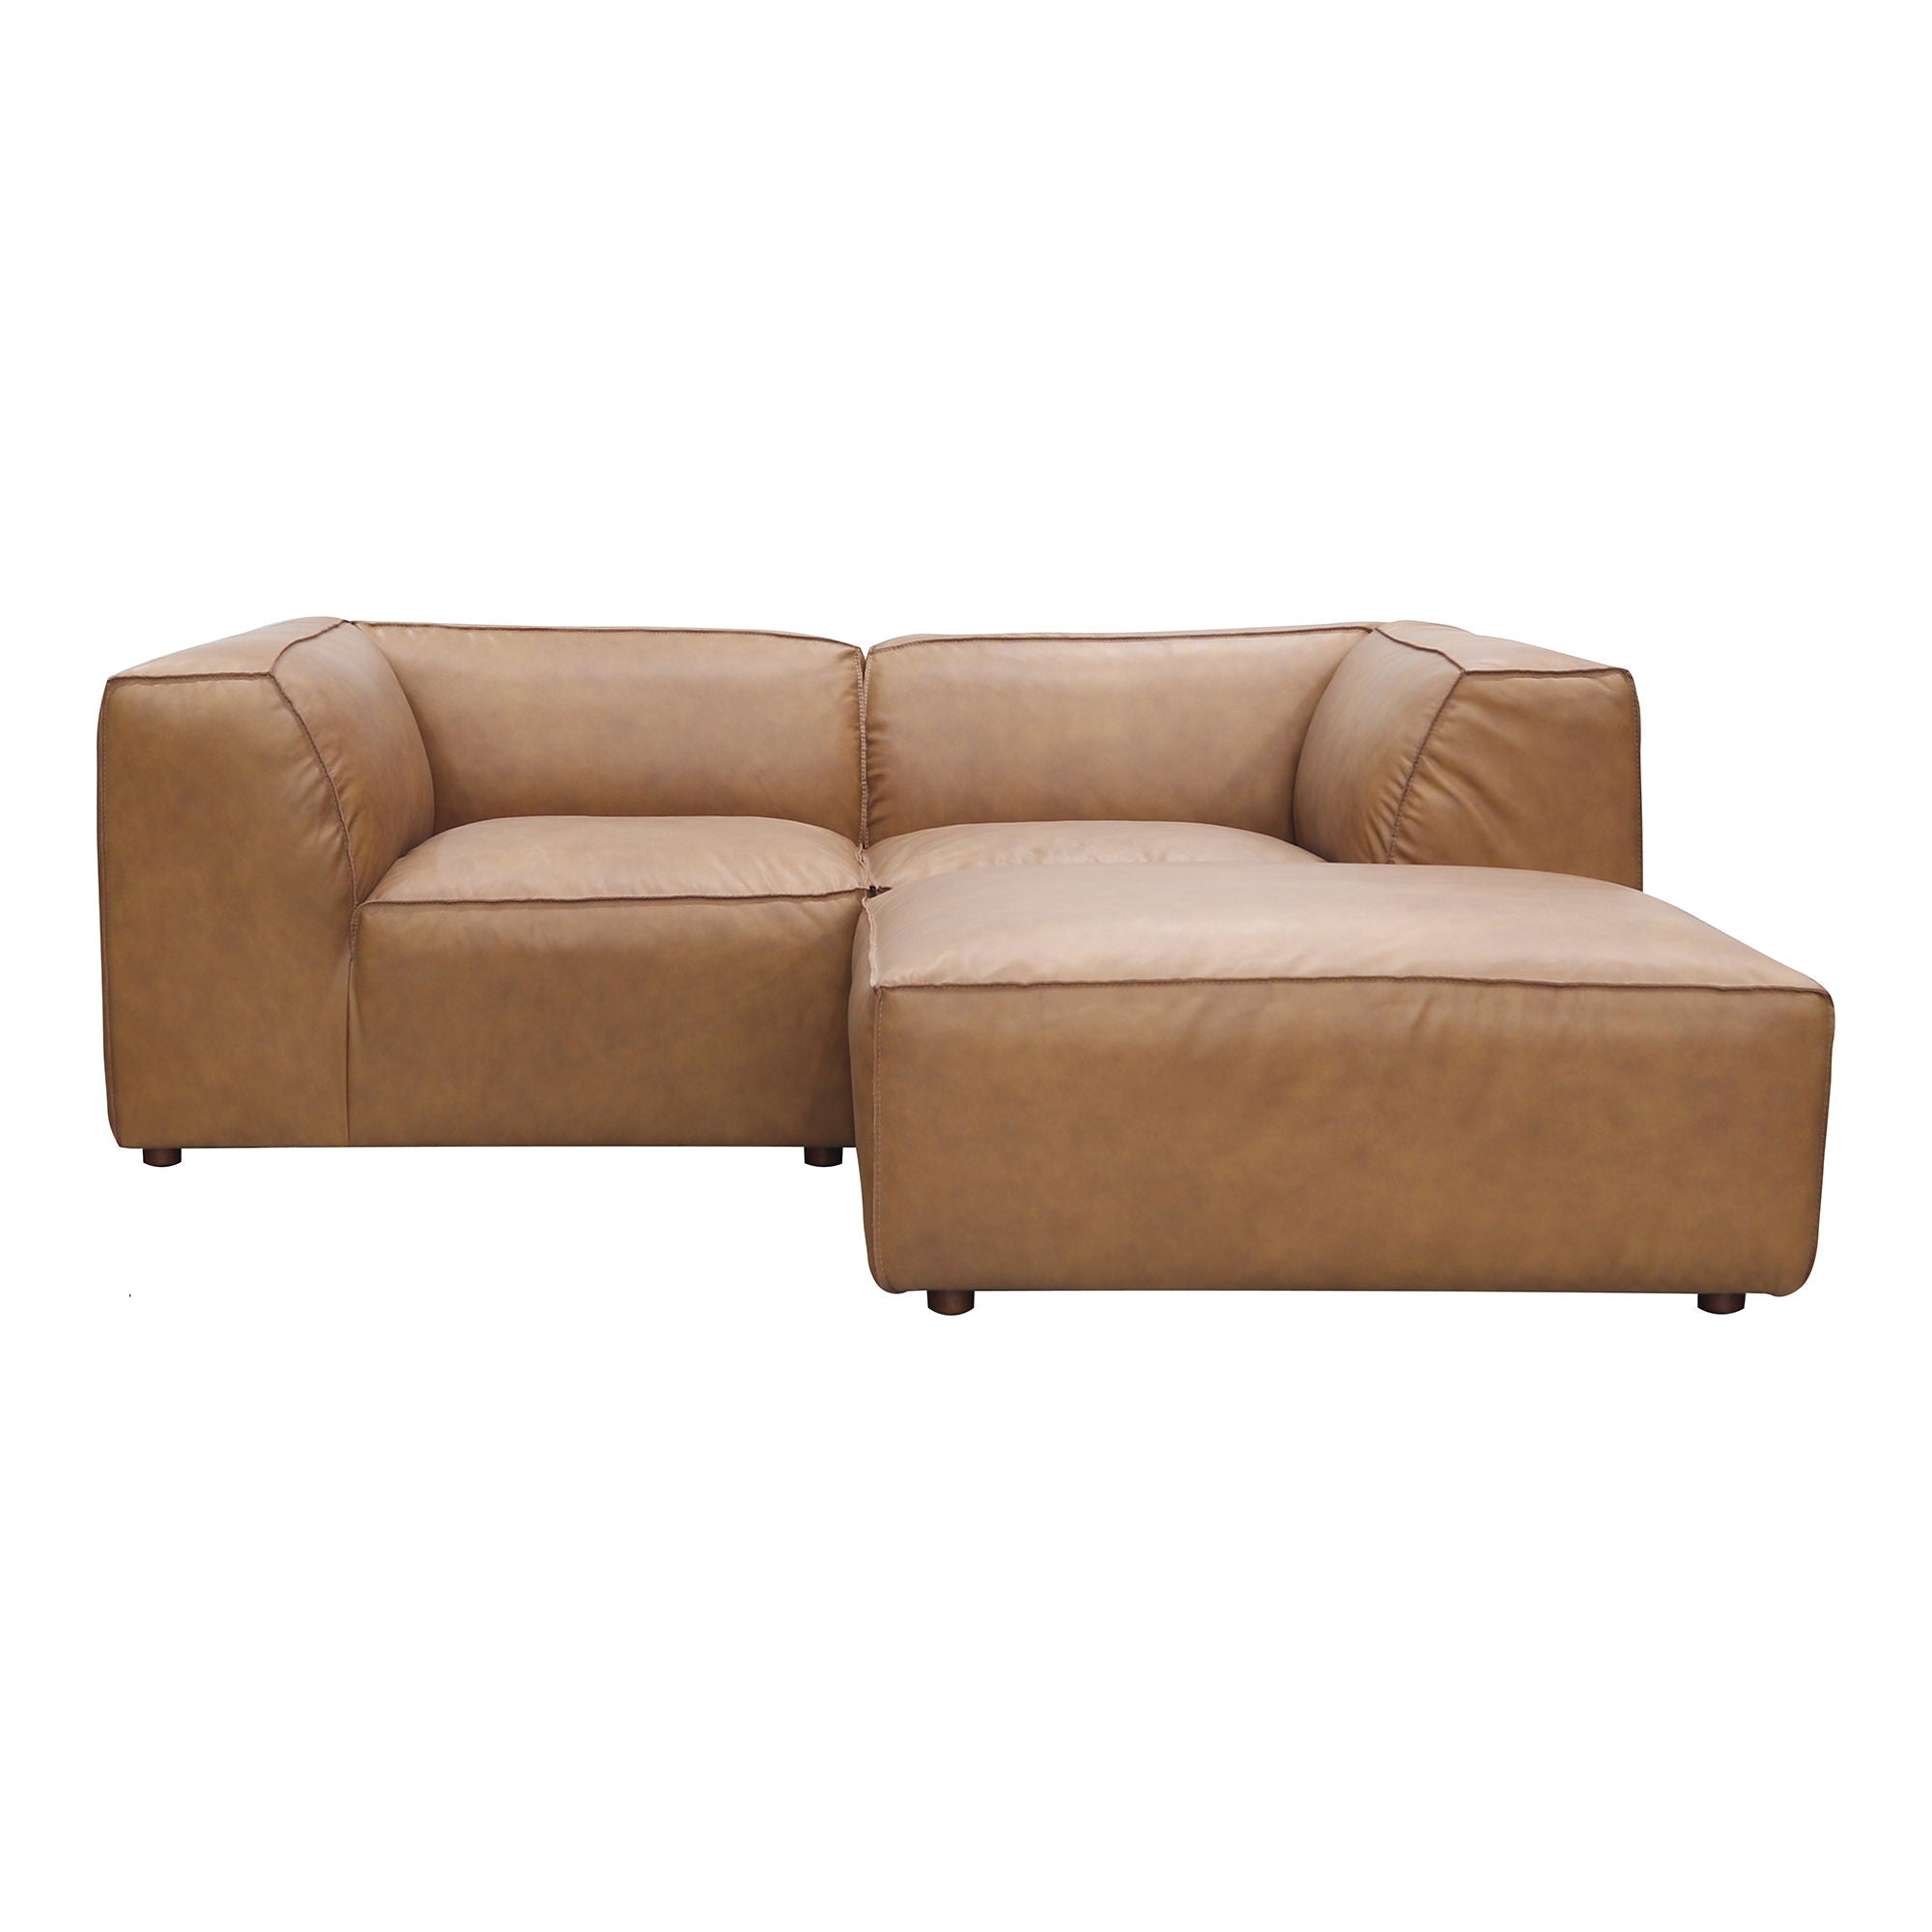 Tan Leather Nook Modular Sectional - 3-Piece, Form-Stationary Sectionals-American Furniture Outlet